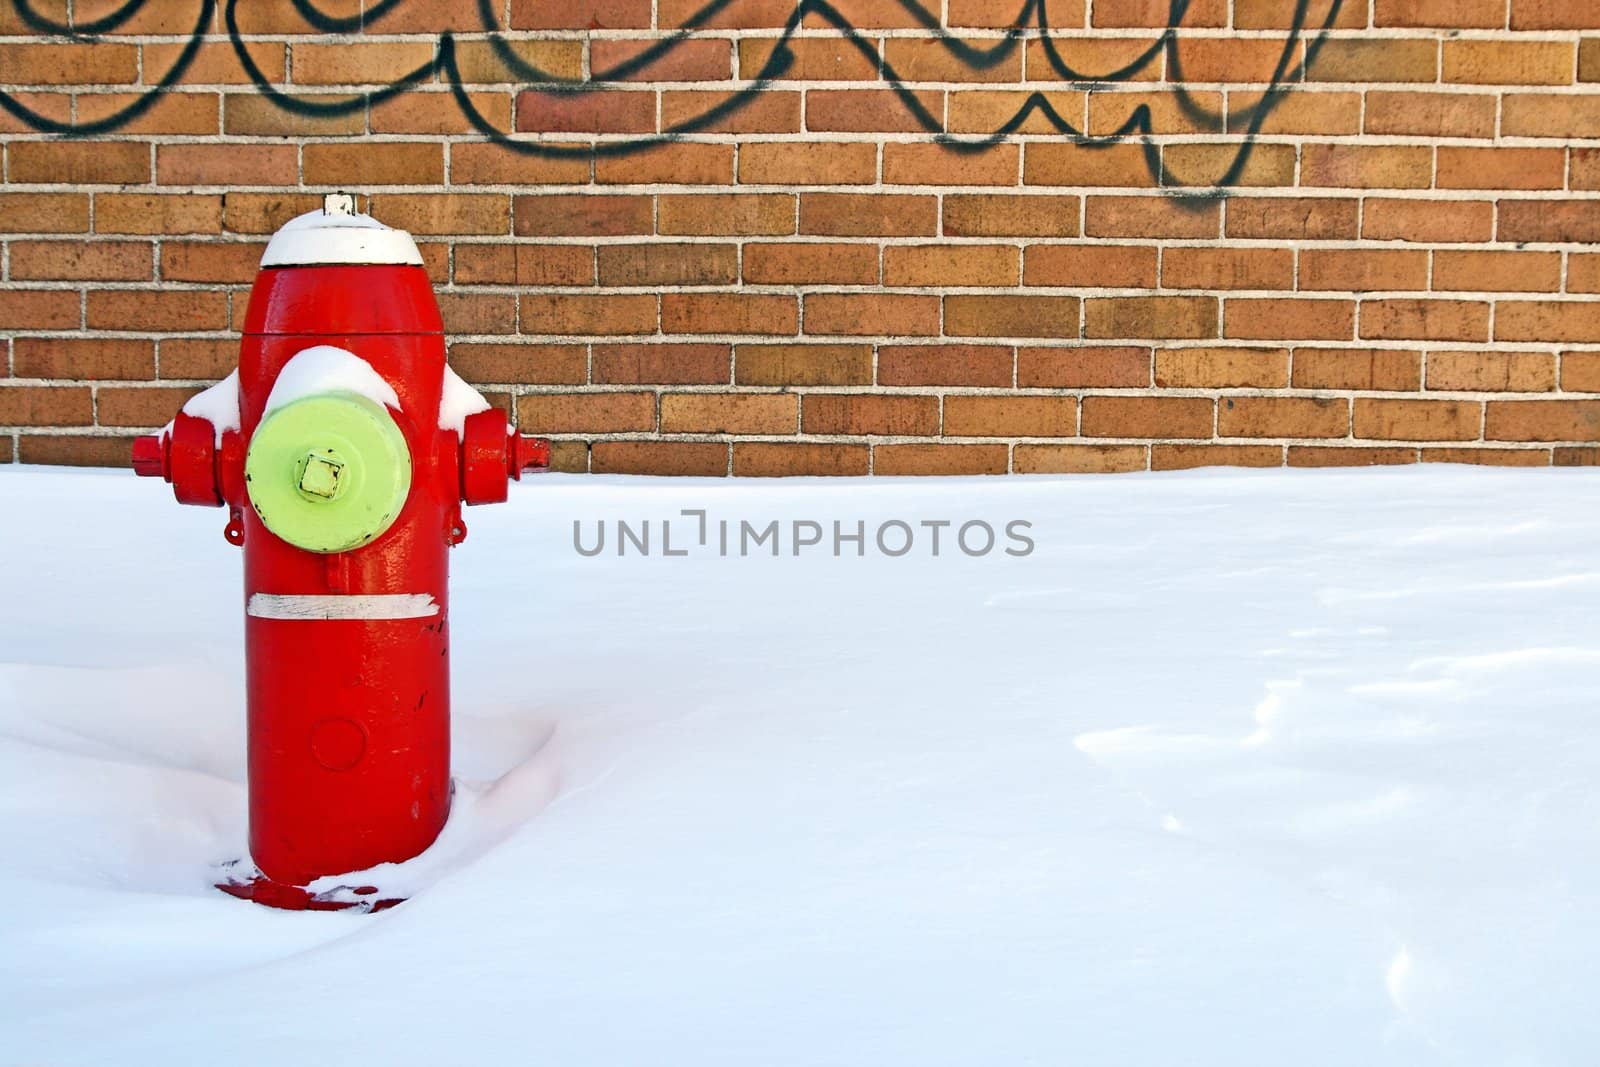 Red fire hydrant in the snow, near a brick building.